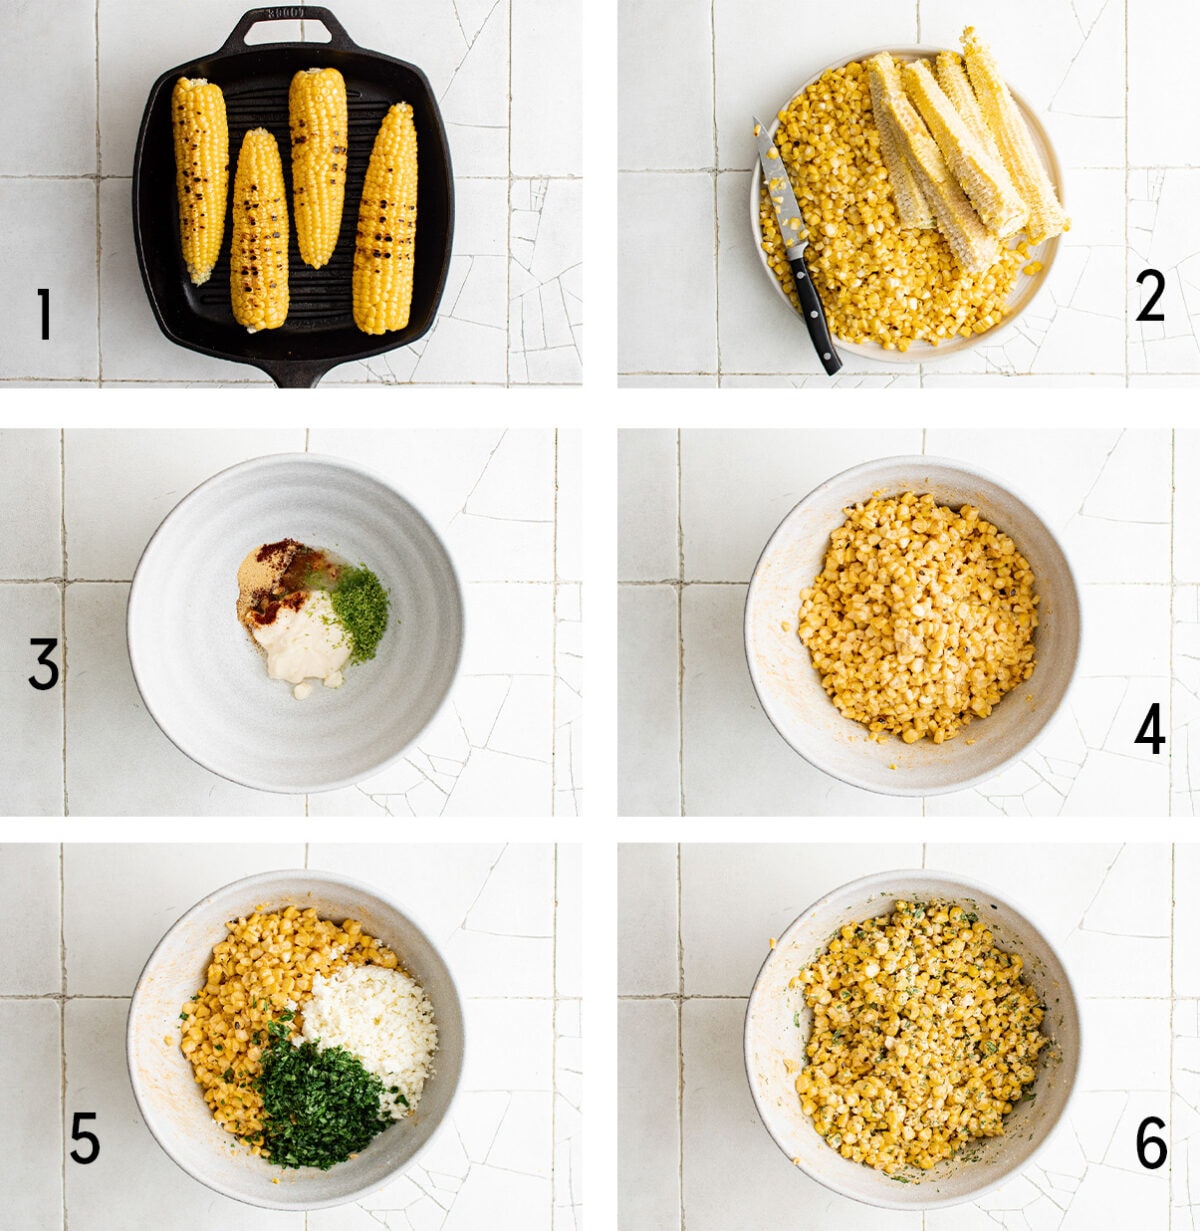 Collage of images showing how to grill corn and make corn salad.